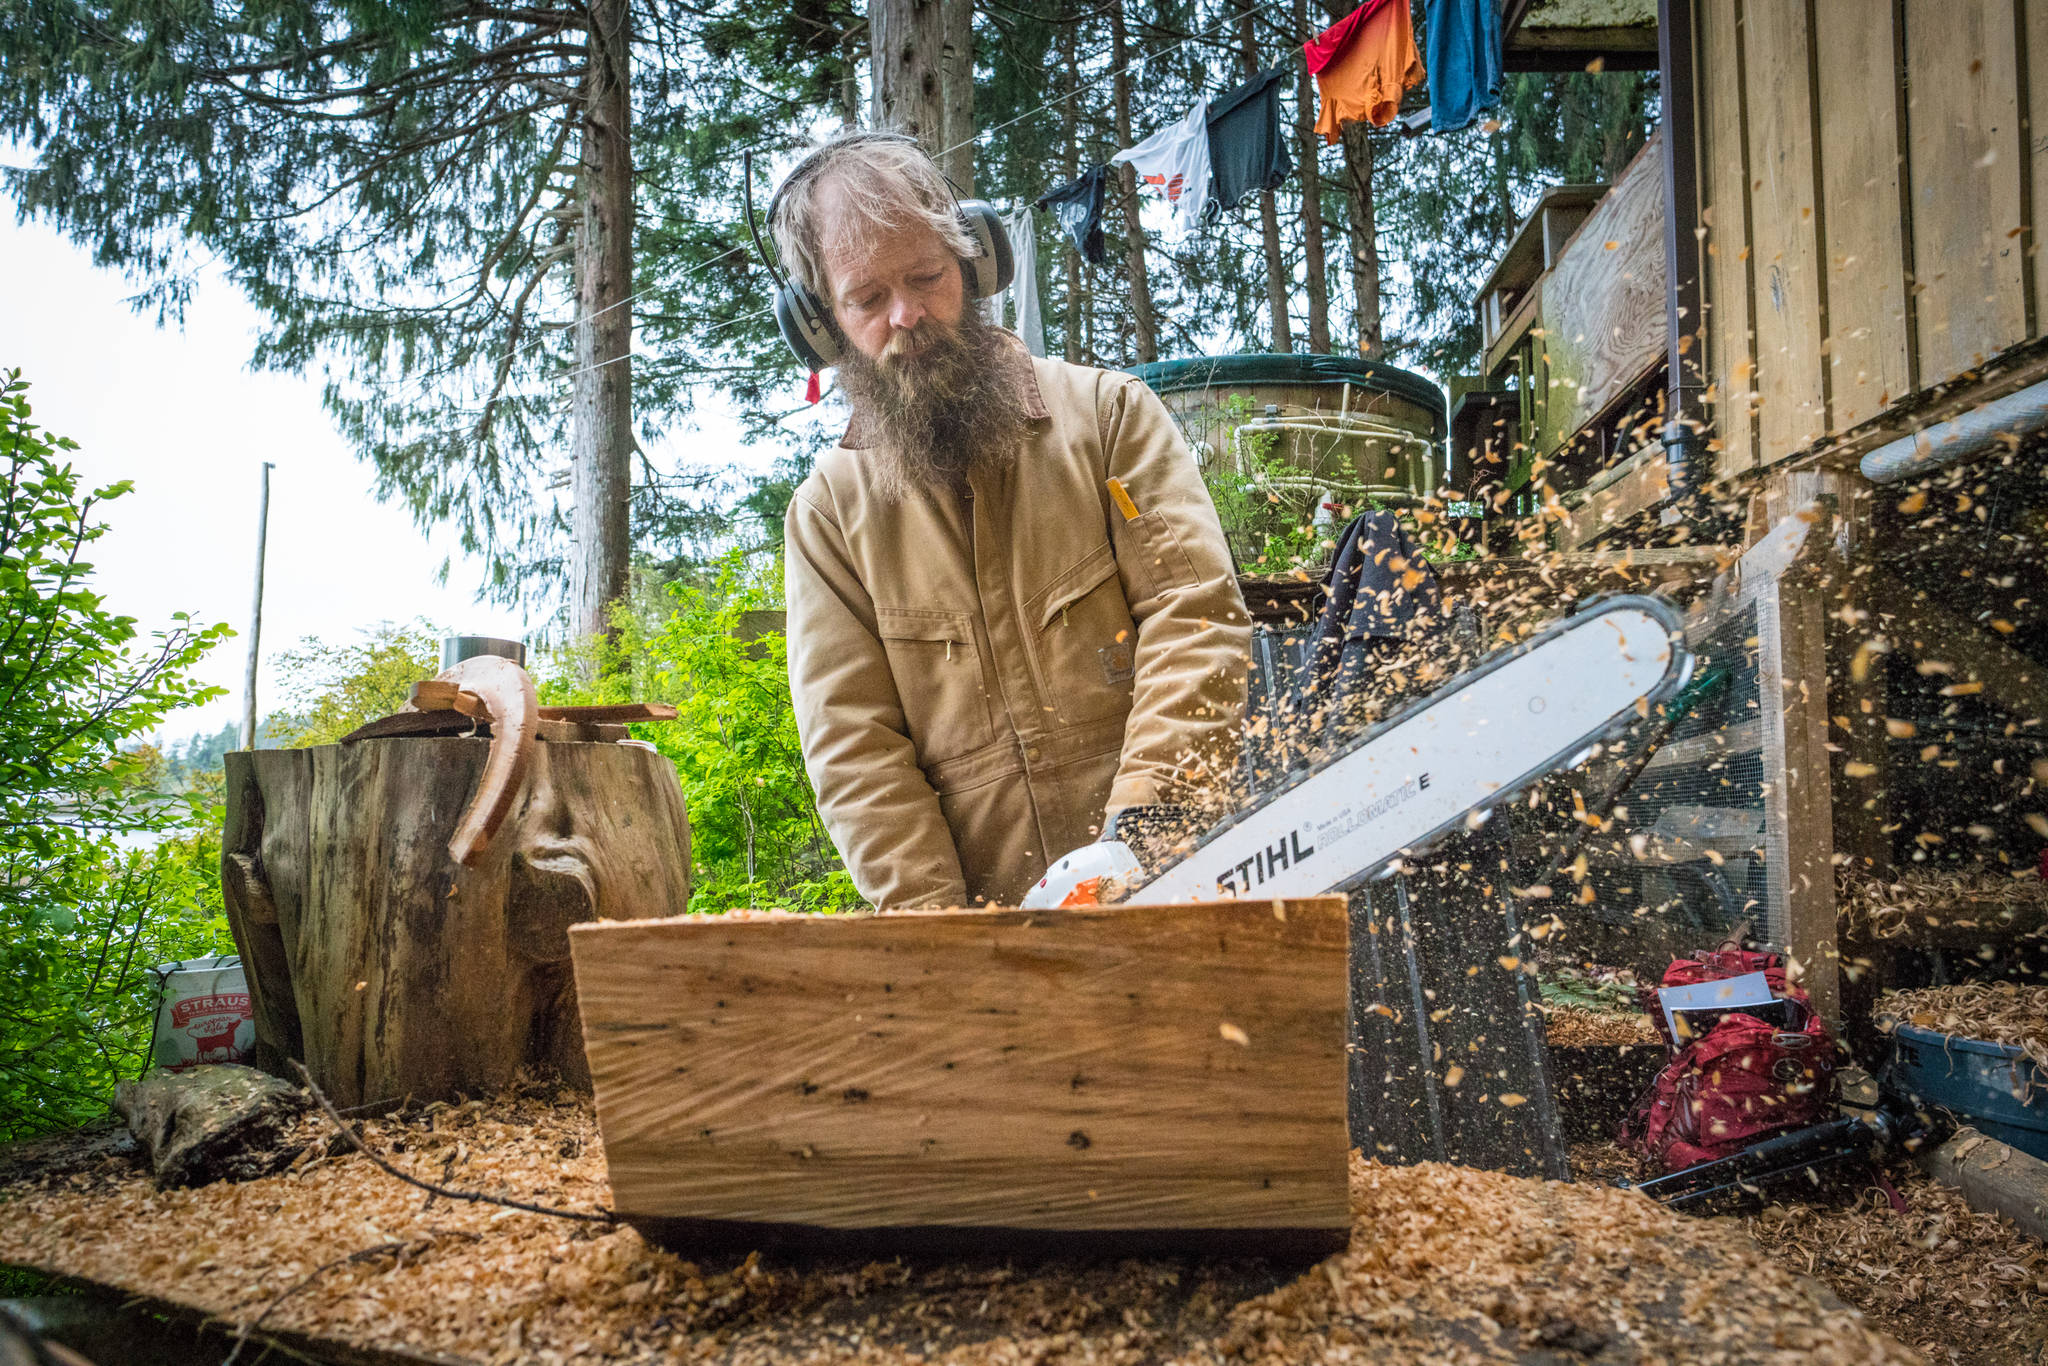 Woodworking in the Tongass National Forest